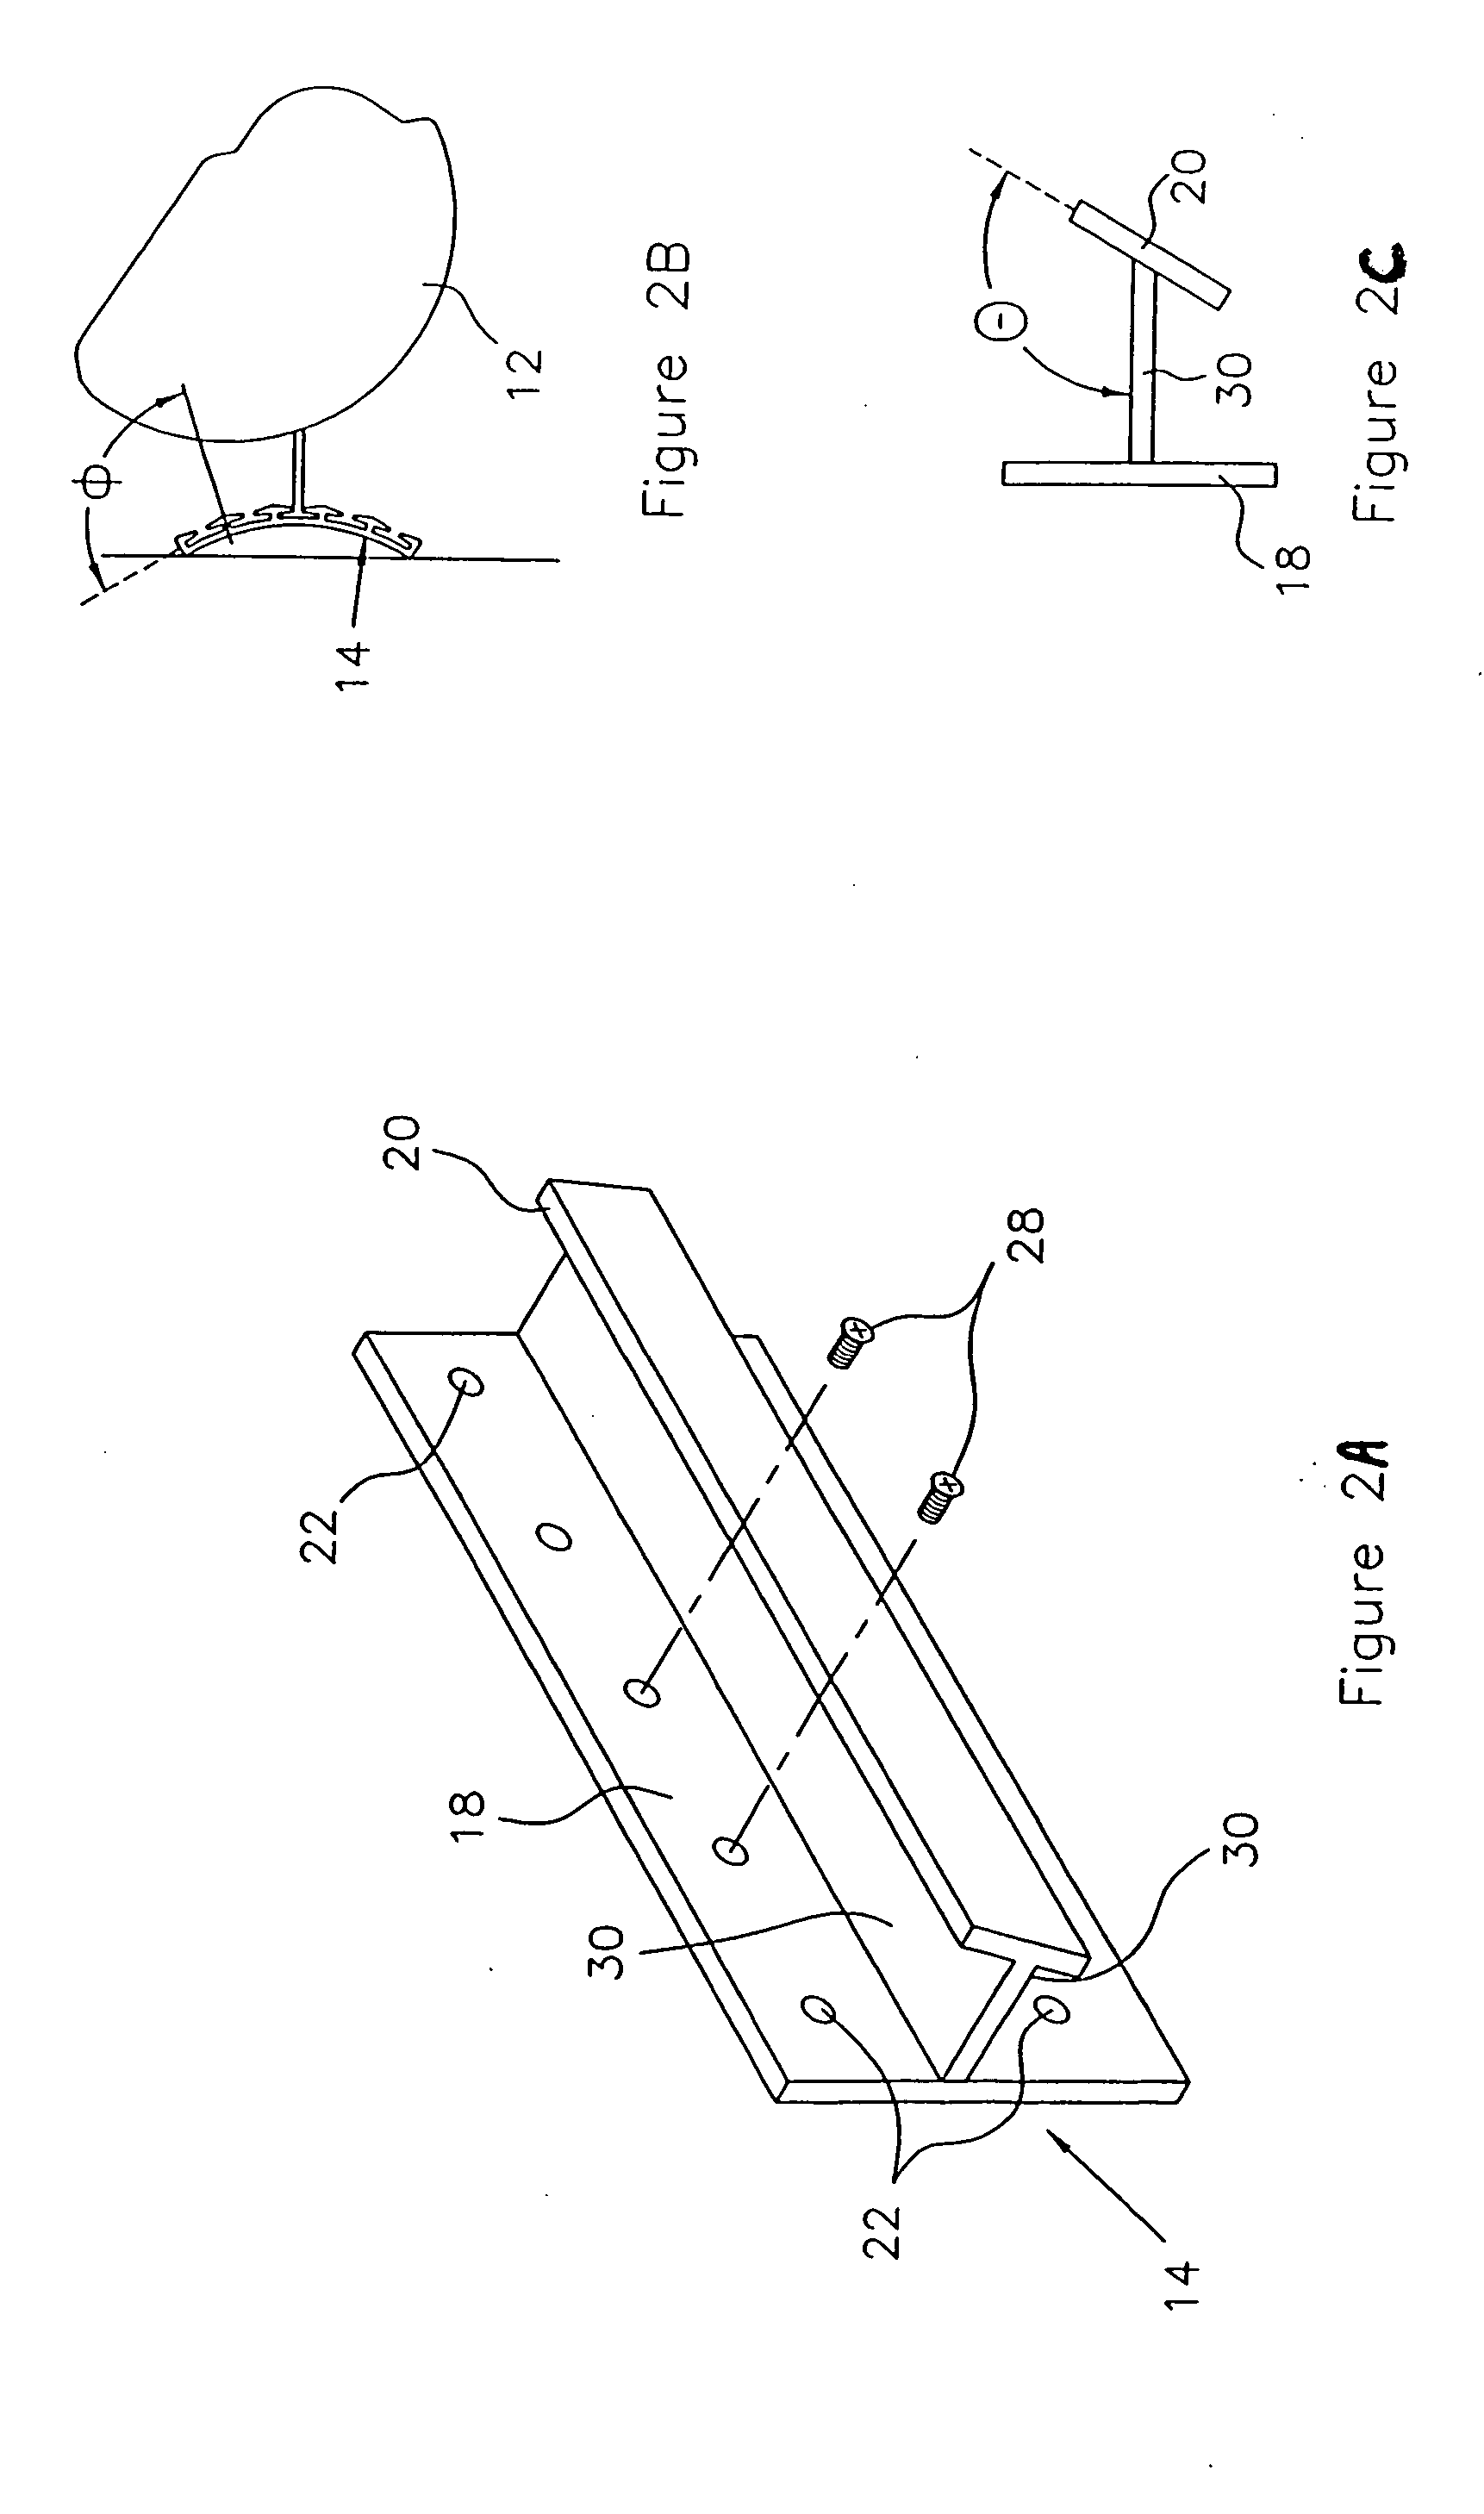 Apparatus and method for a speaker mounting system including a lightpipe and a rotating base stand